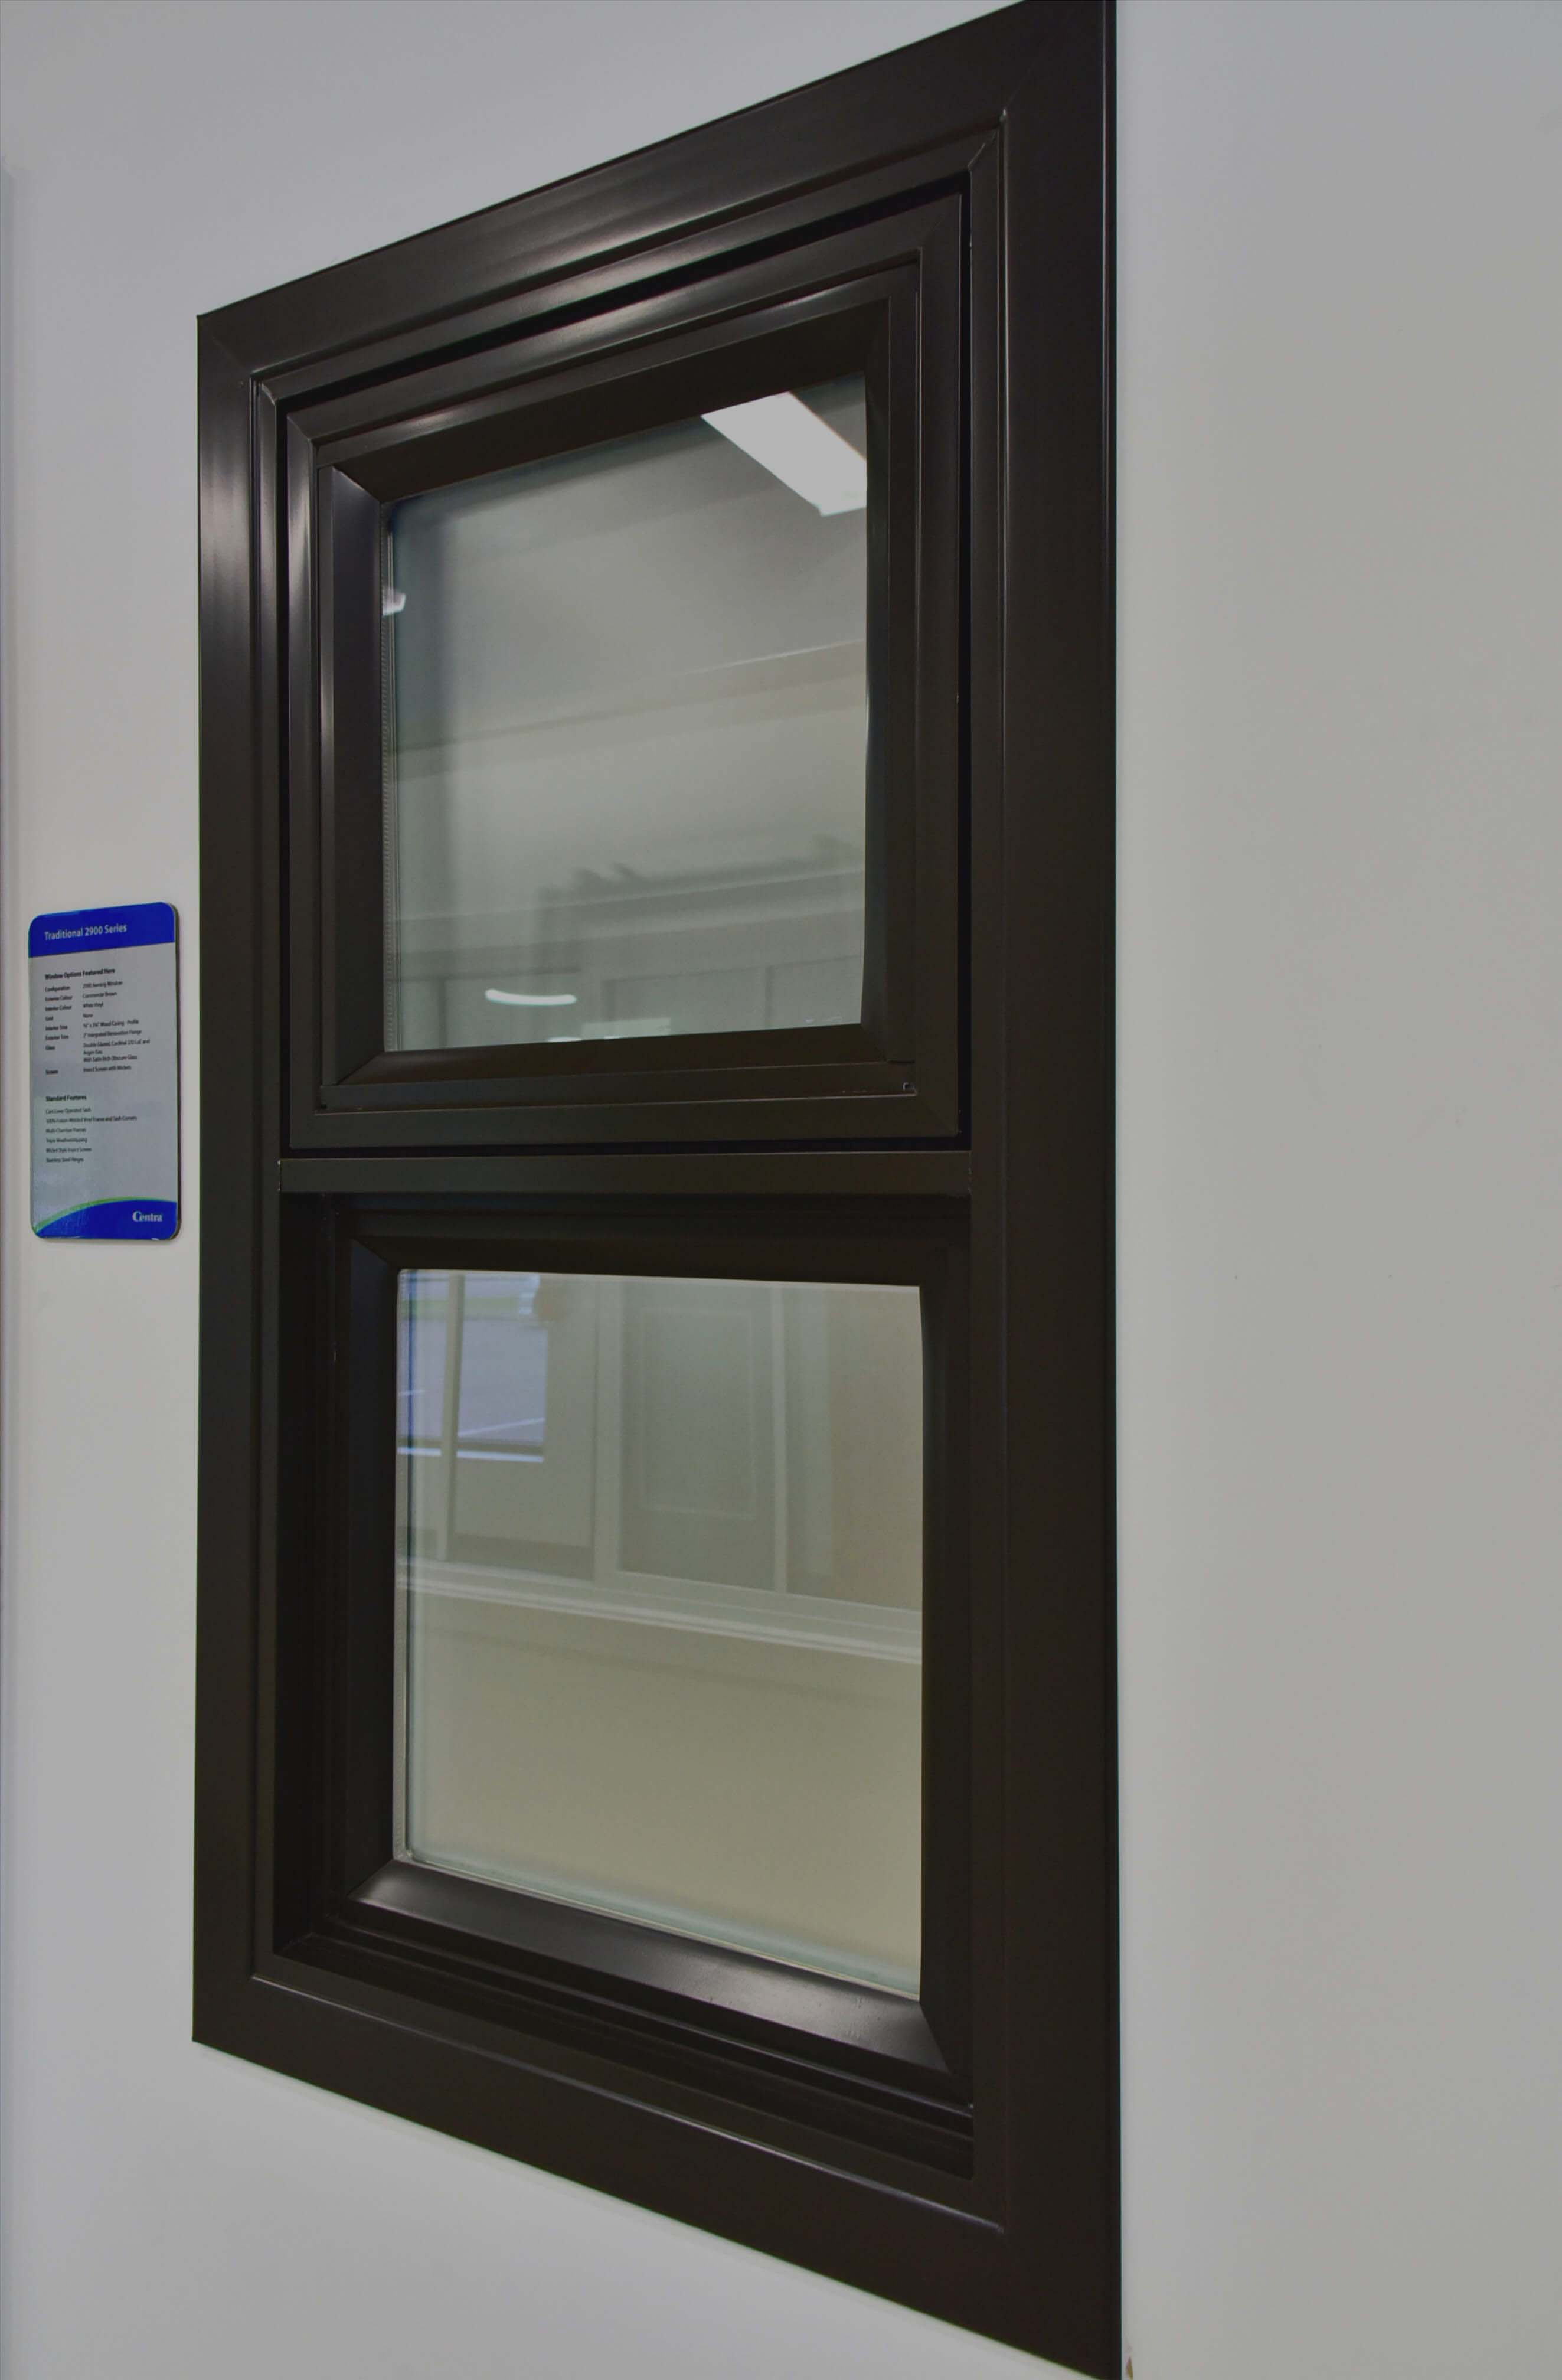 Black vinyl vertical sliding window manufactured by Centra with obscure glass for privacy.